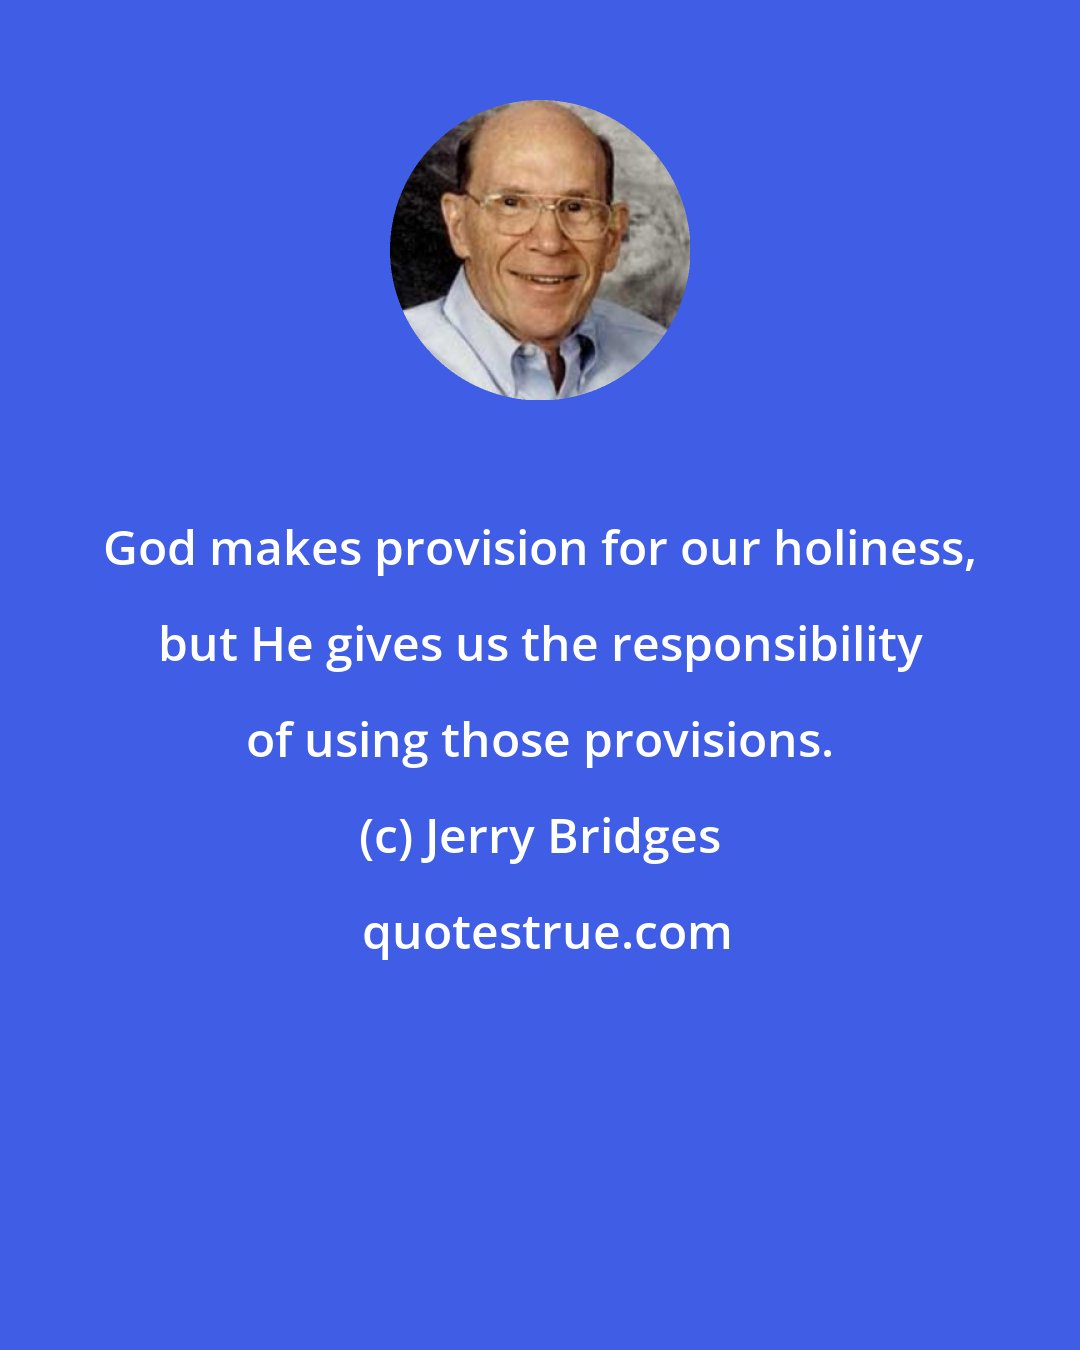 Jerry Bridges: God makes provision for our holiness, but He gives us the responsibility of using those provisions.